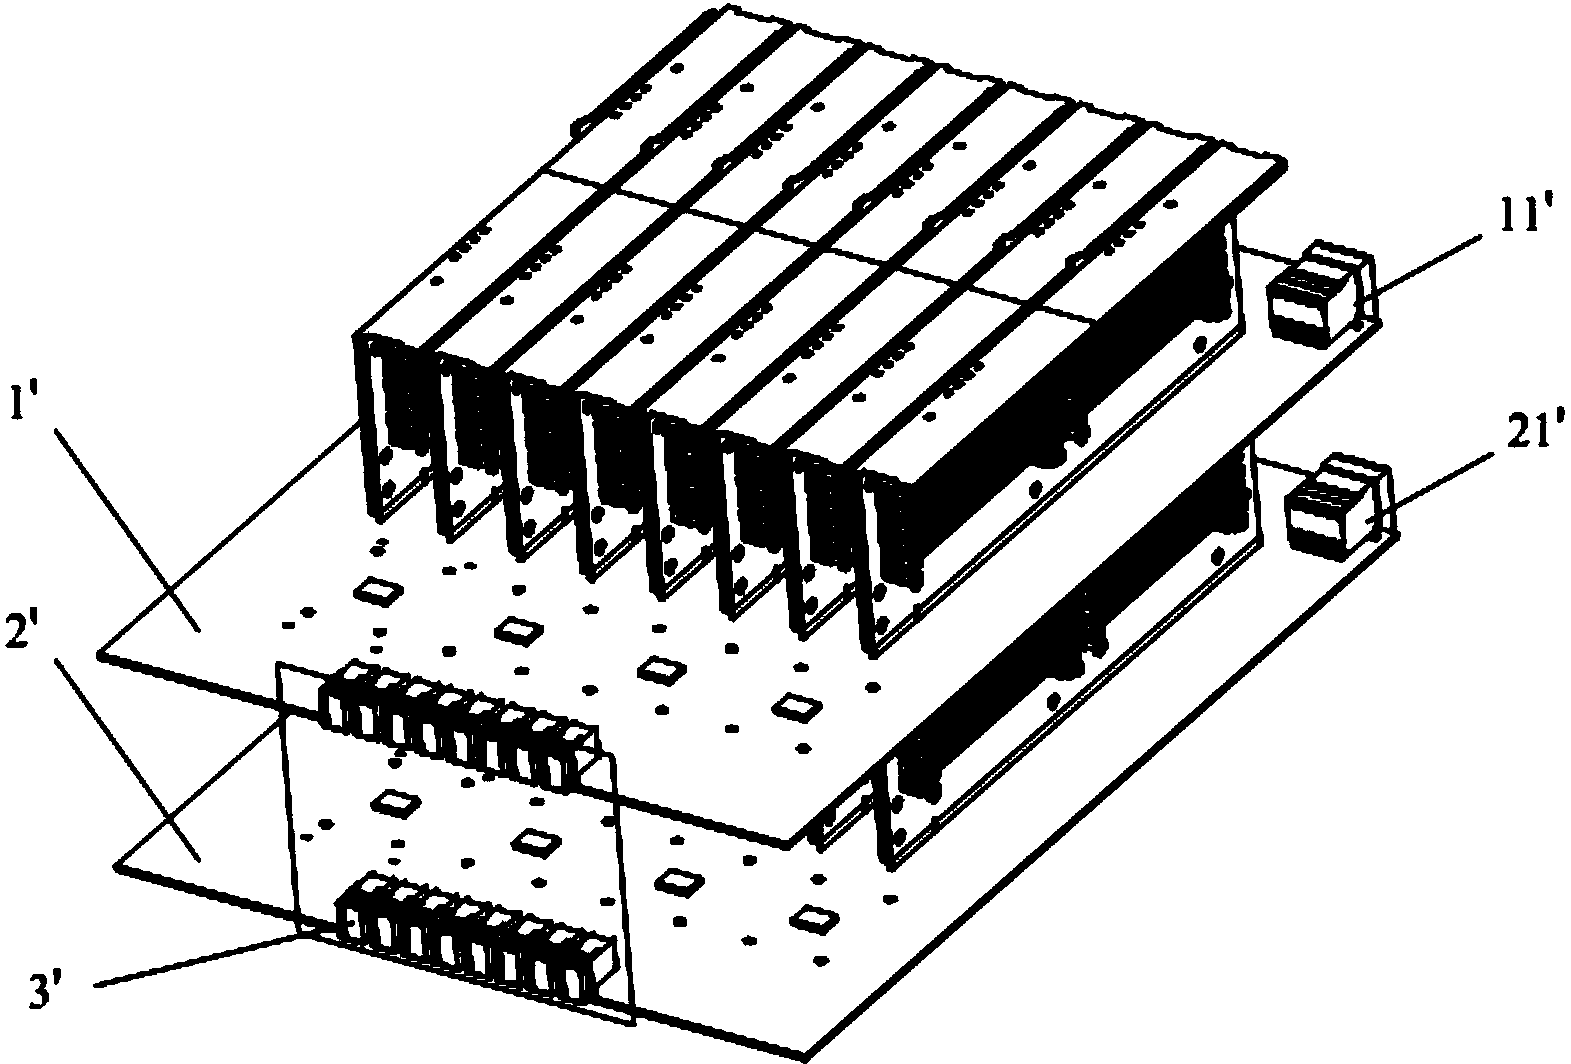 Eight-processor system and server